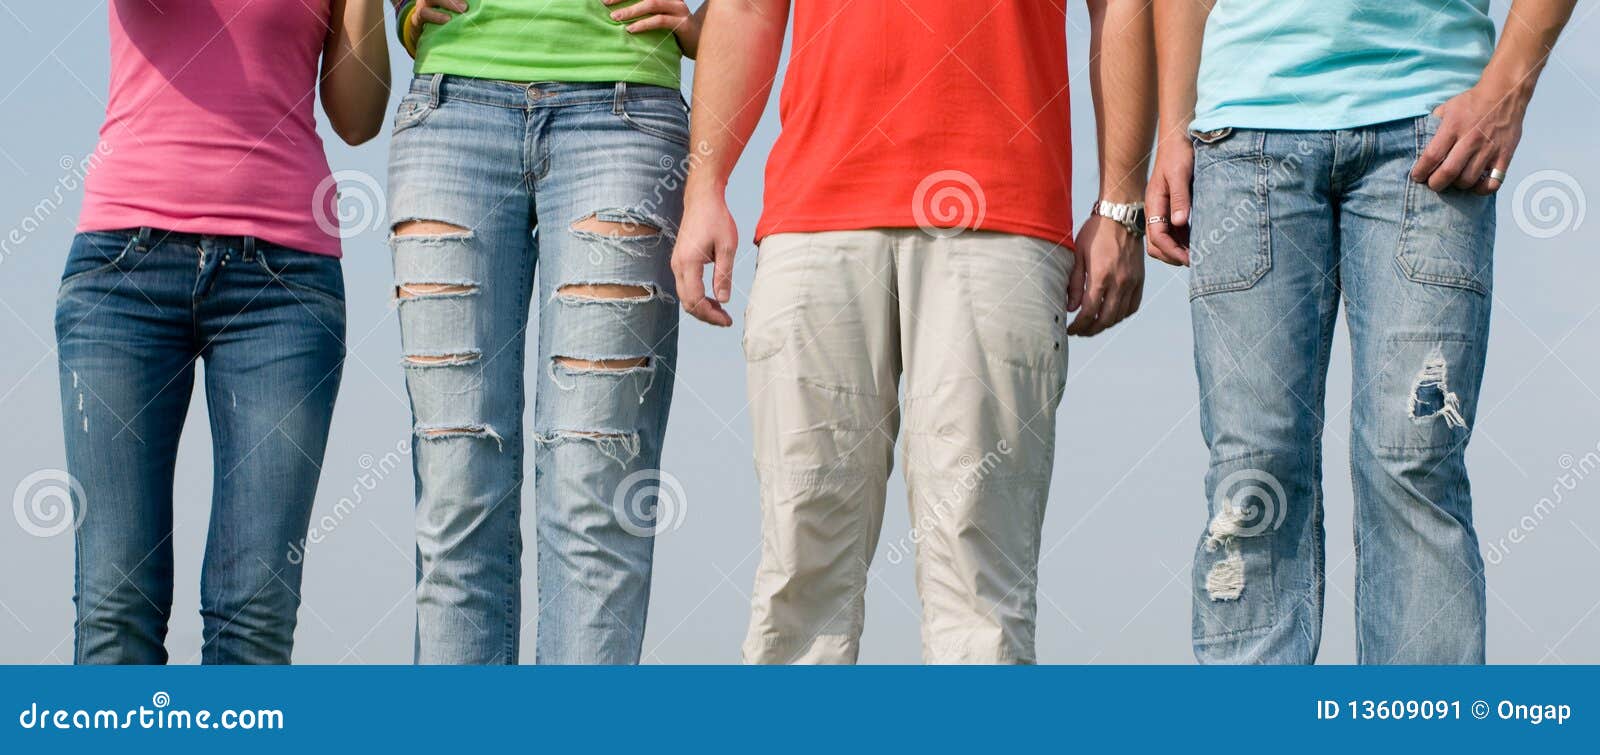  People wearing jeans stock image Image of leisure 